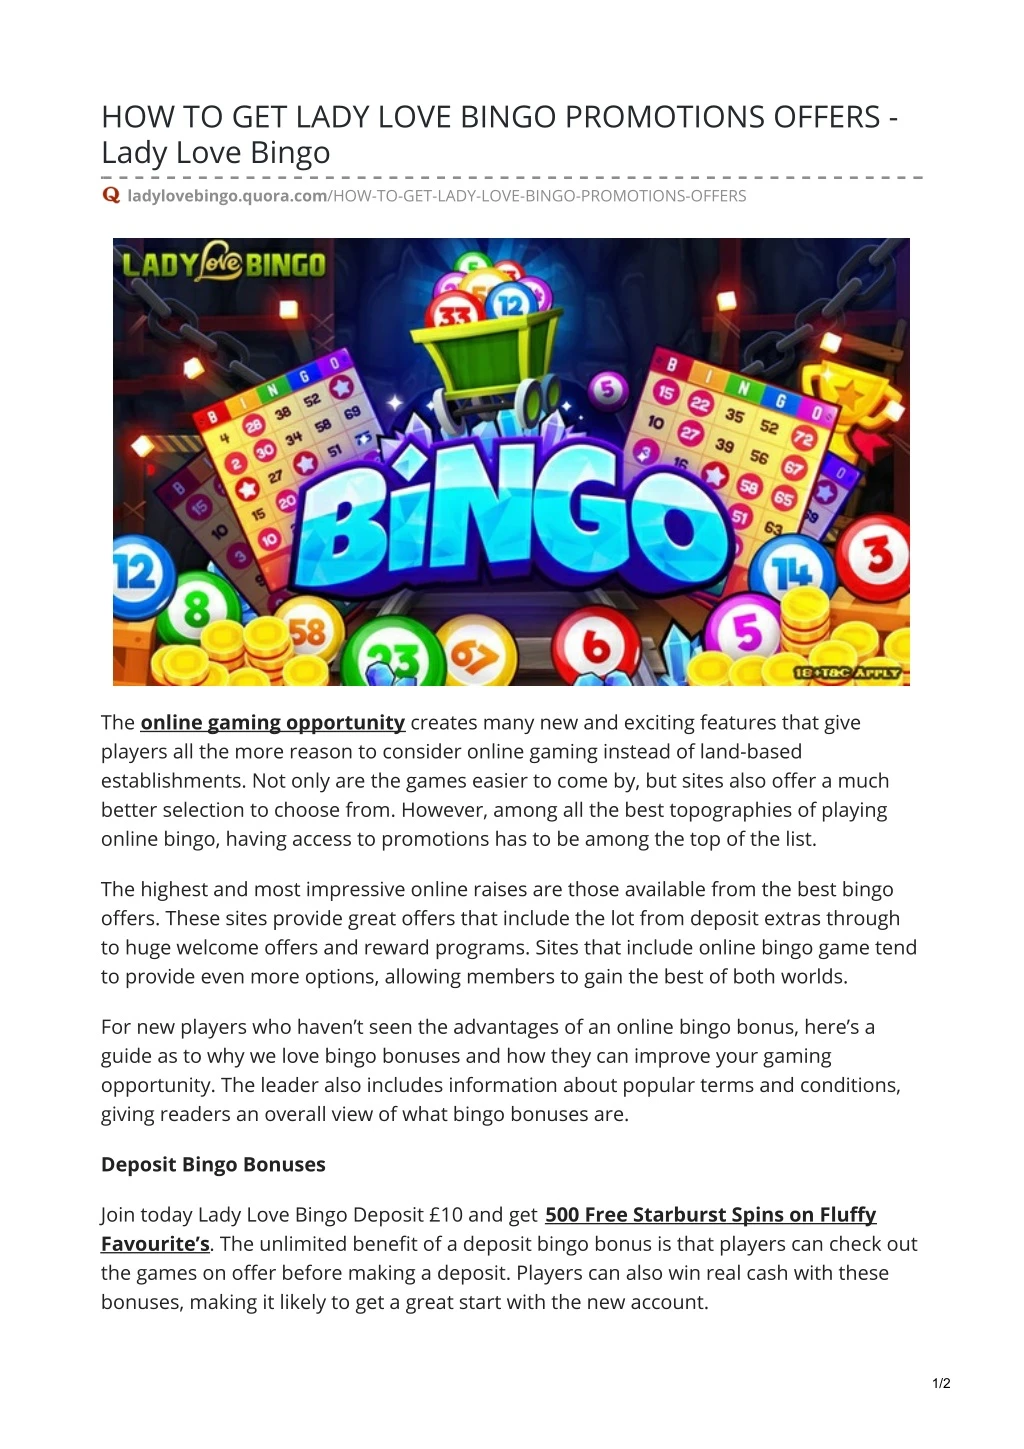 how to get lady love bingo promotions offers lady